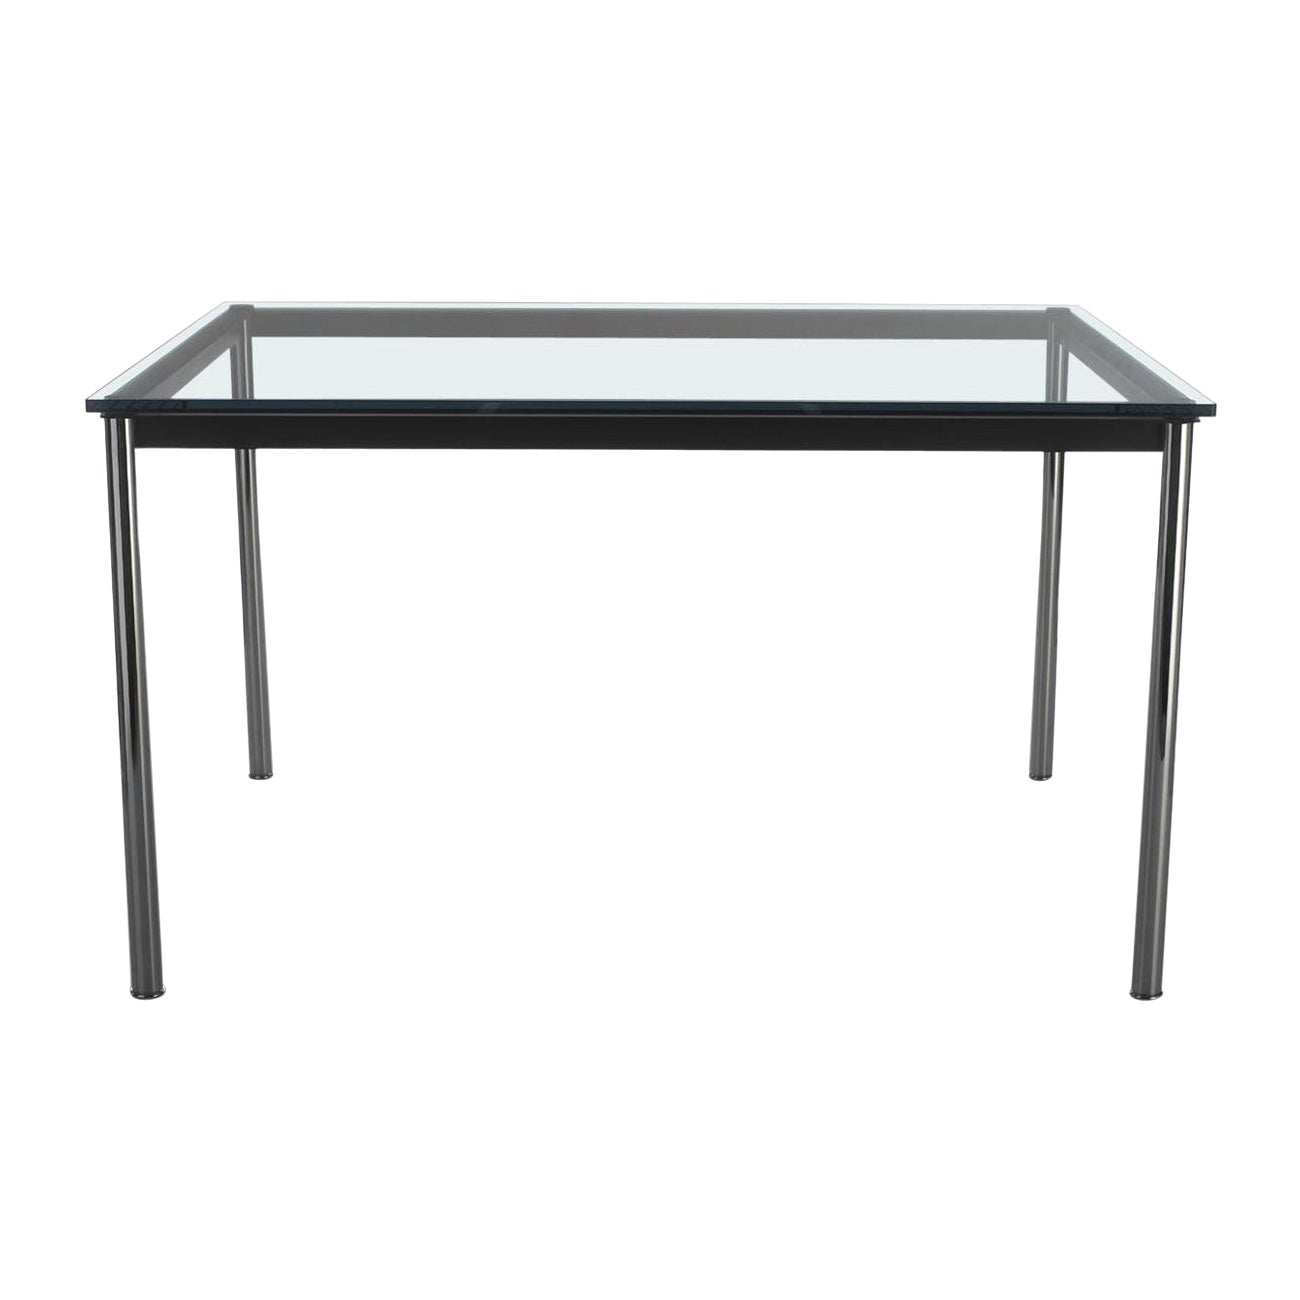 Le Corbusier, Pierre Jeanneret, Charlotte Perriand LC10 Table by Cassina